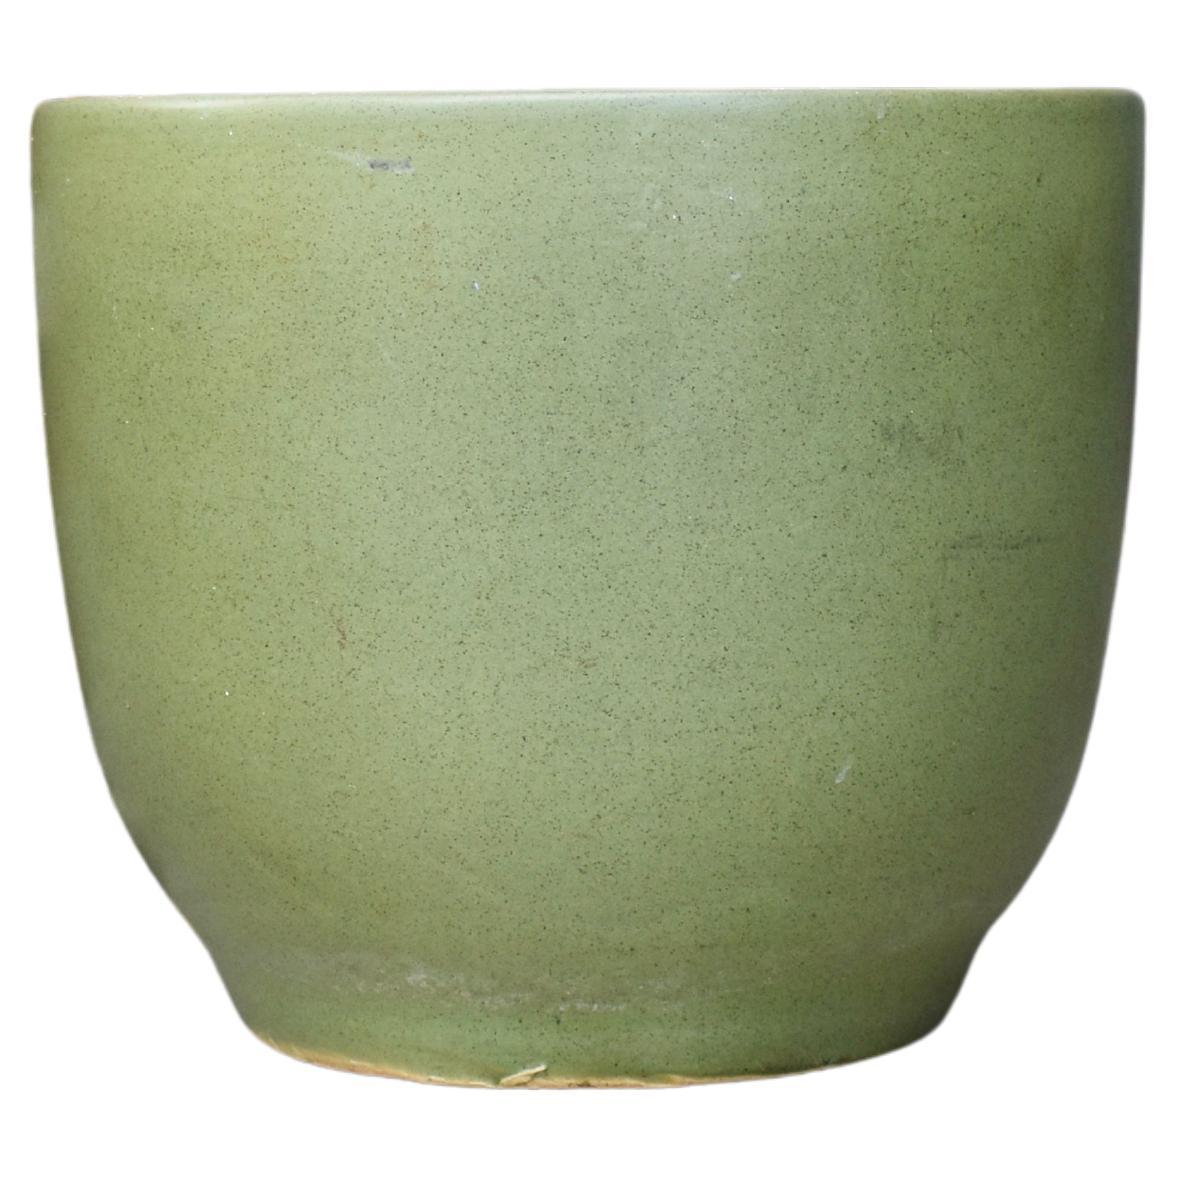 California Pottery Green Speckled Planter Pot